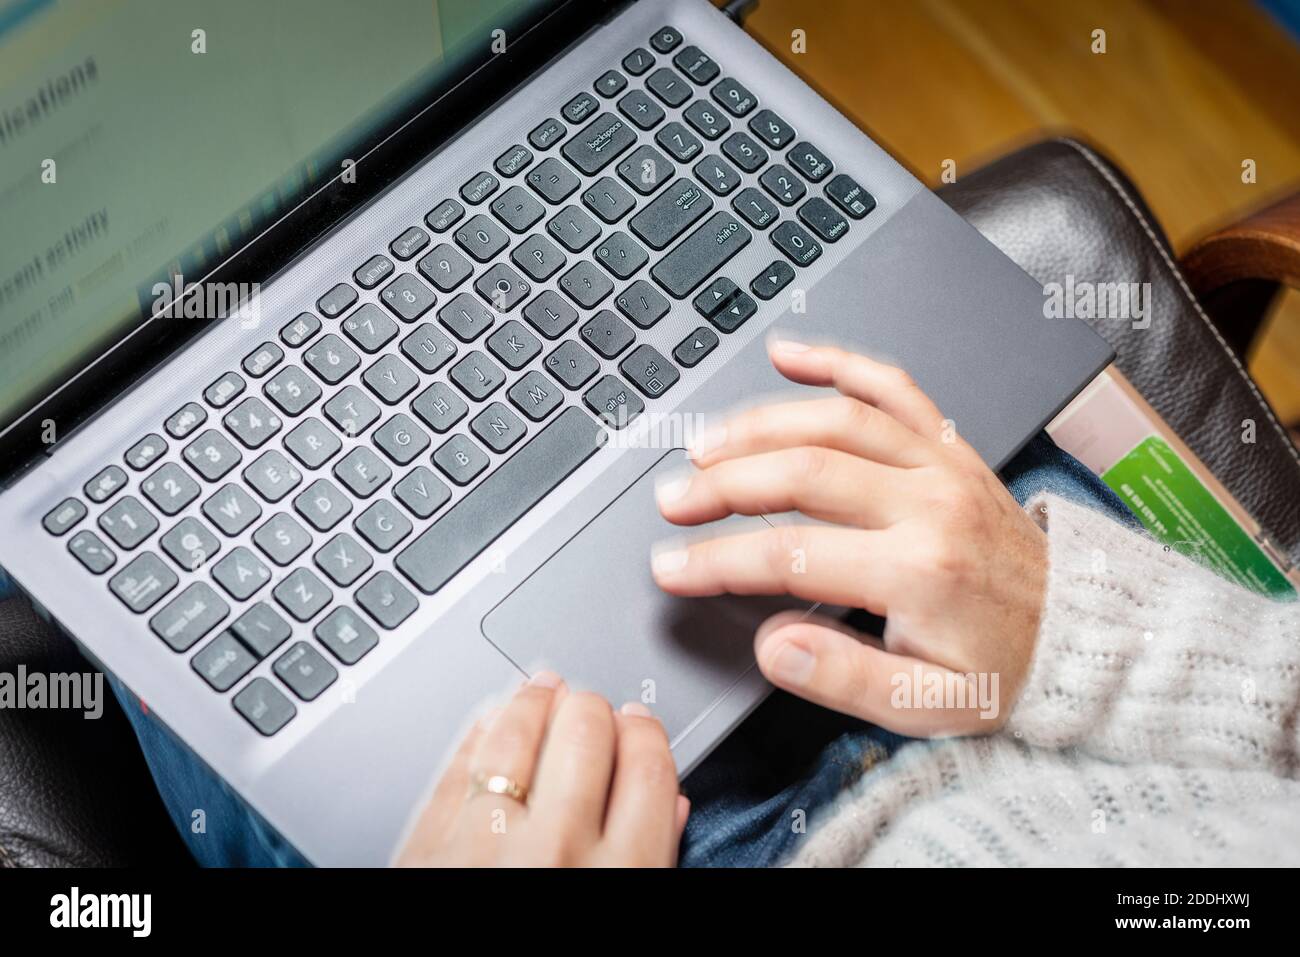 Woman loging in on lap top computer- motion blur Stock Photo